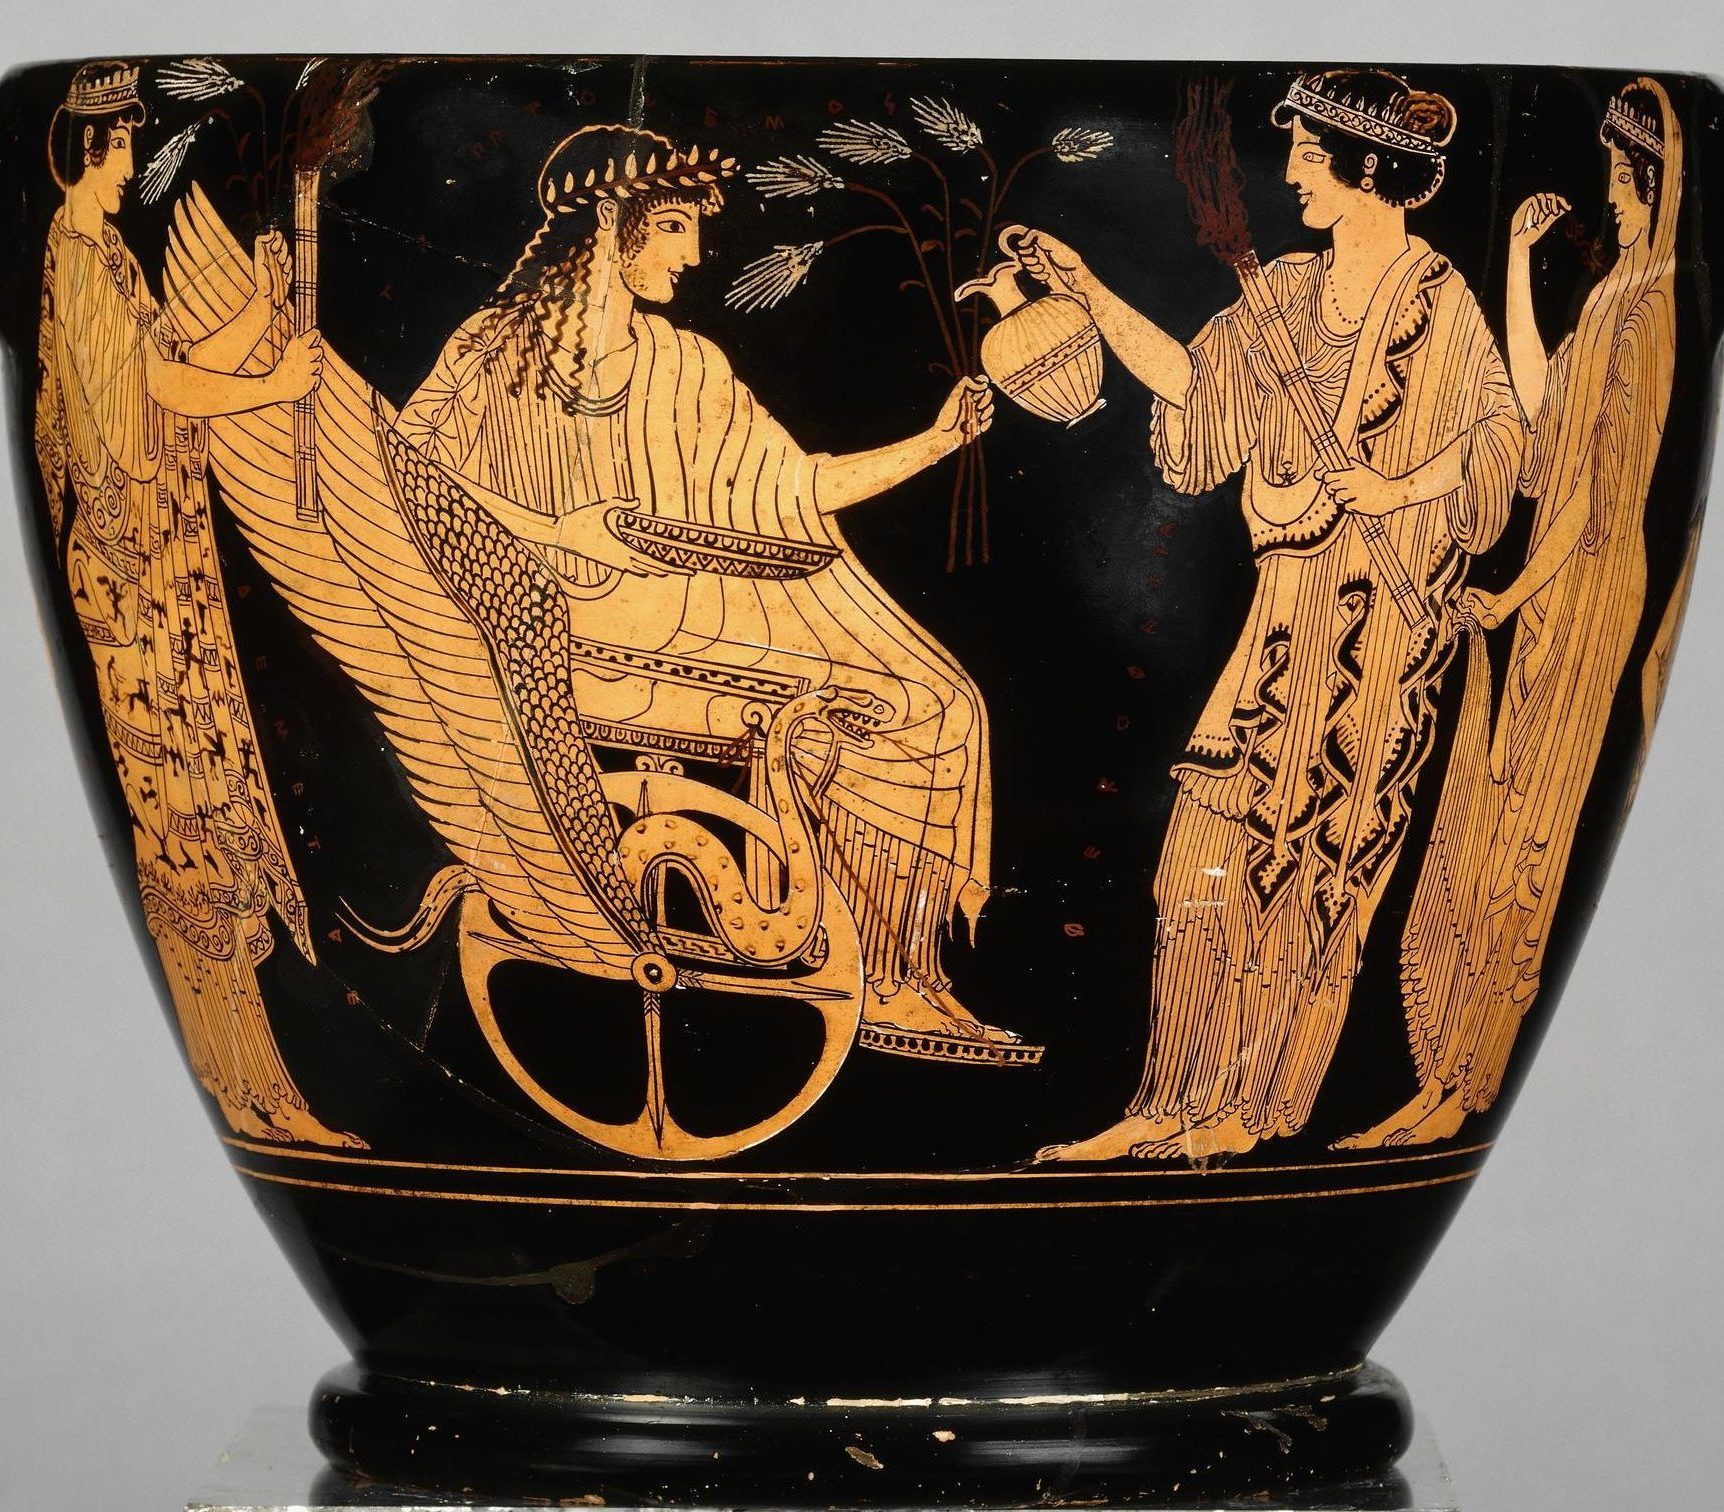 Triptolemos seated in a winged chariot holding sheaves of wheat and a bowl. Persephone, holding a torch, pours from an oinochoe jug into the bowl. Demeter stands behind Triptolemos holding a torch and sheaves of wheat. Eleusis stands behind Demeter.